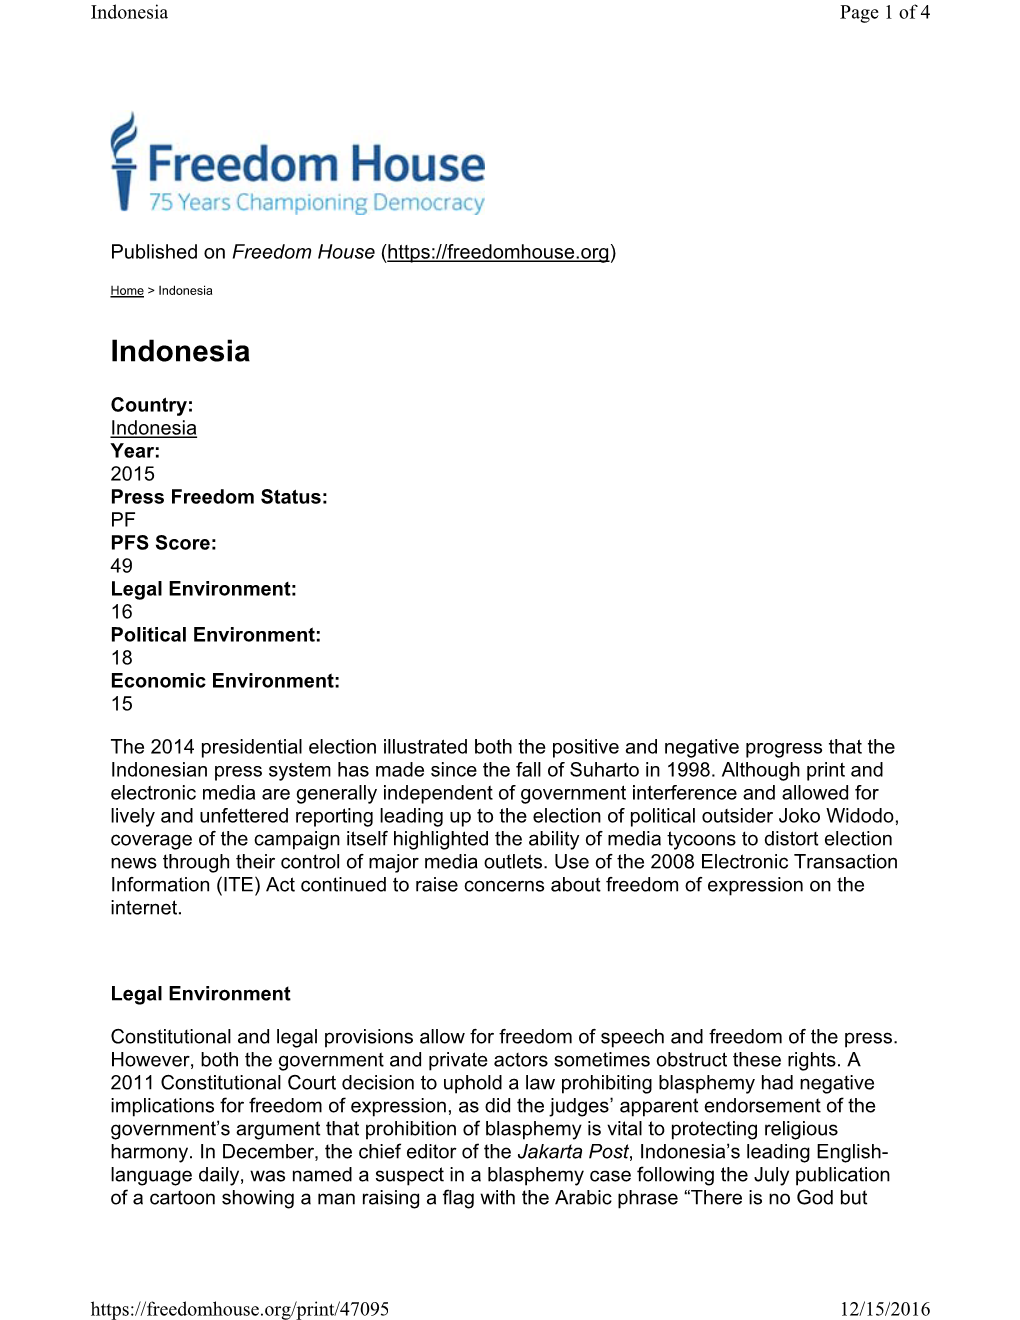 Freedom of the Press 2016 Indonesia